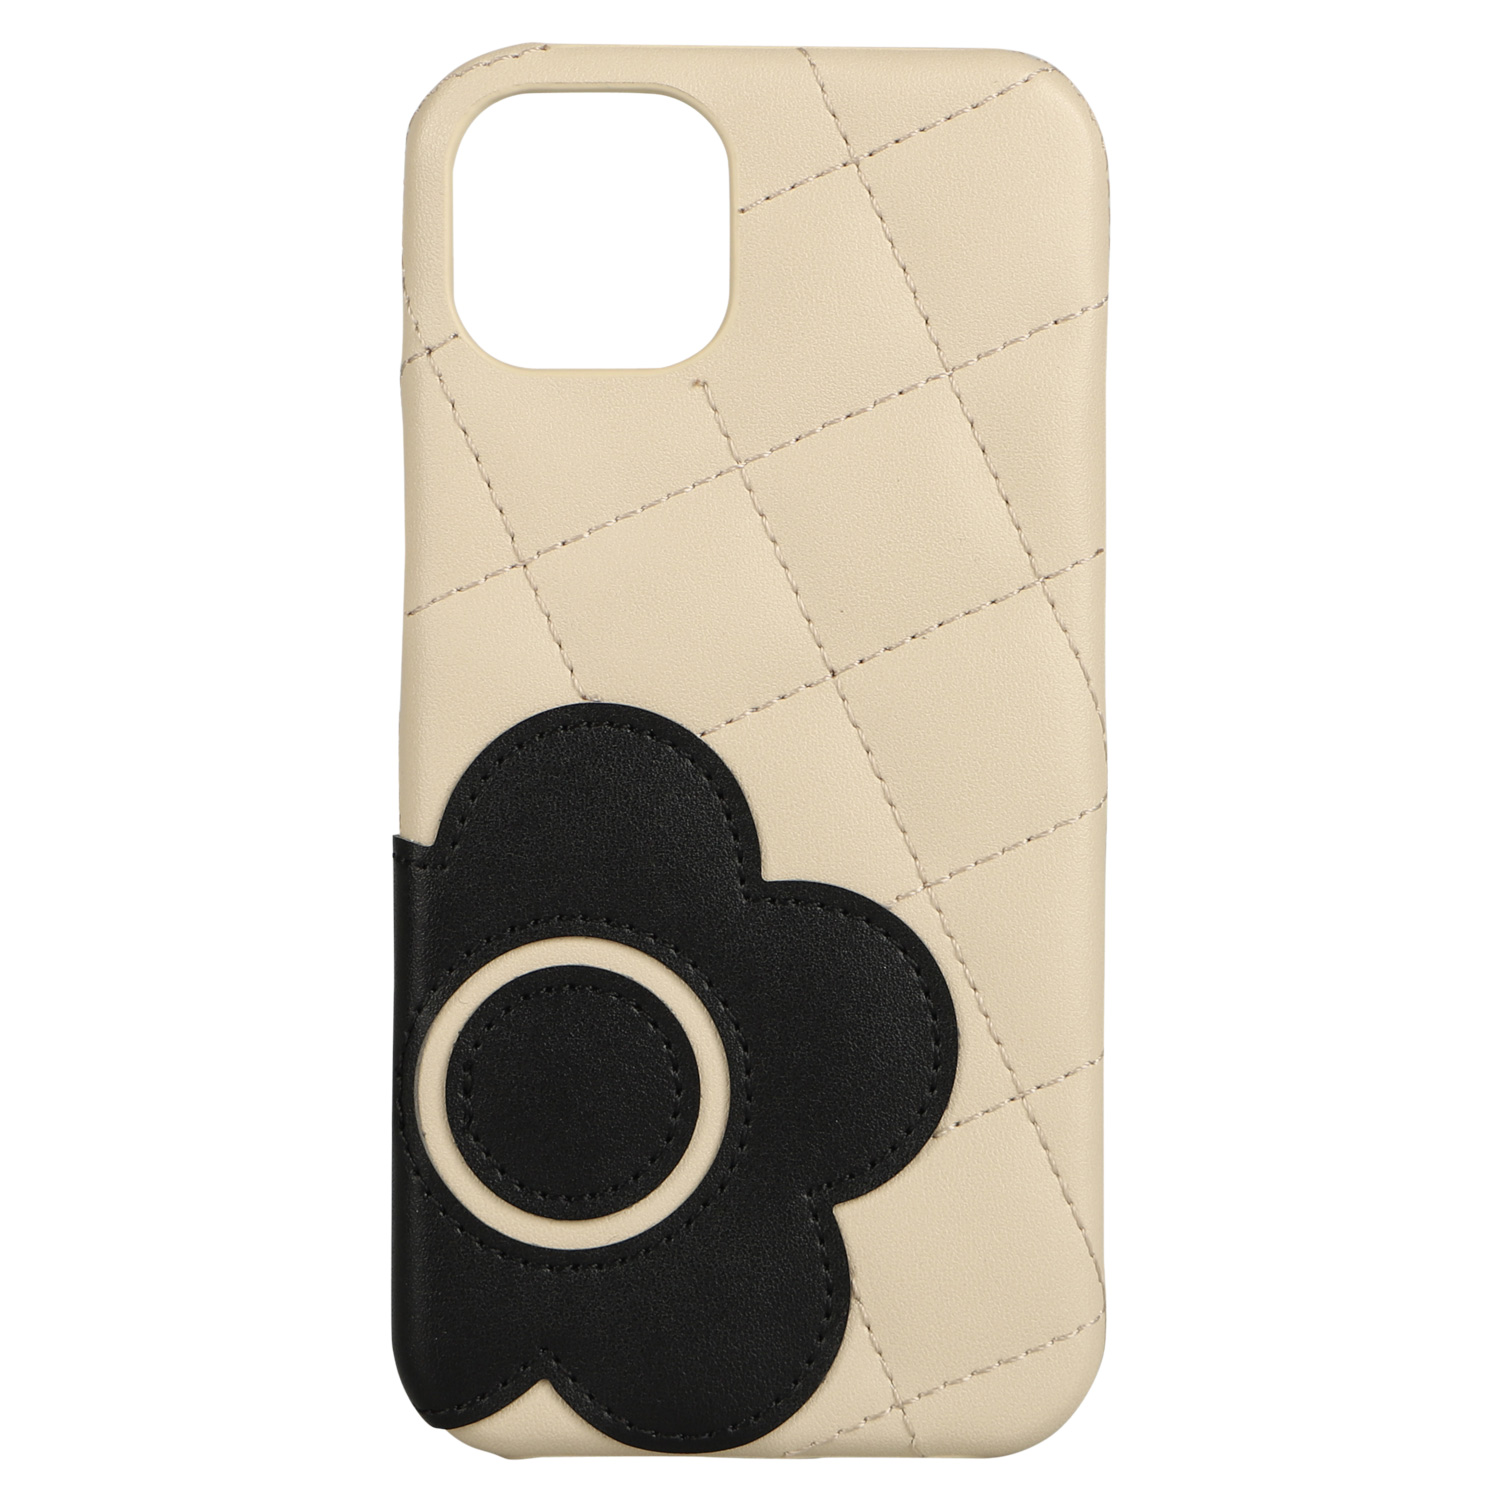 MARY QUANT マリークヮント iPhone 13 ケース スマホ 携帯 レディース マリクワ PU QUILT LEATHER BACK CASE IP13-MQ03｜sneak｜03